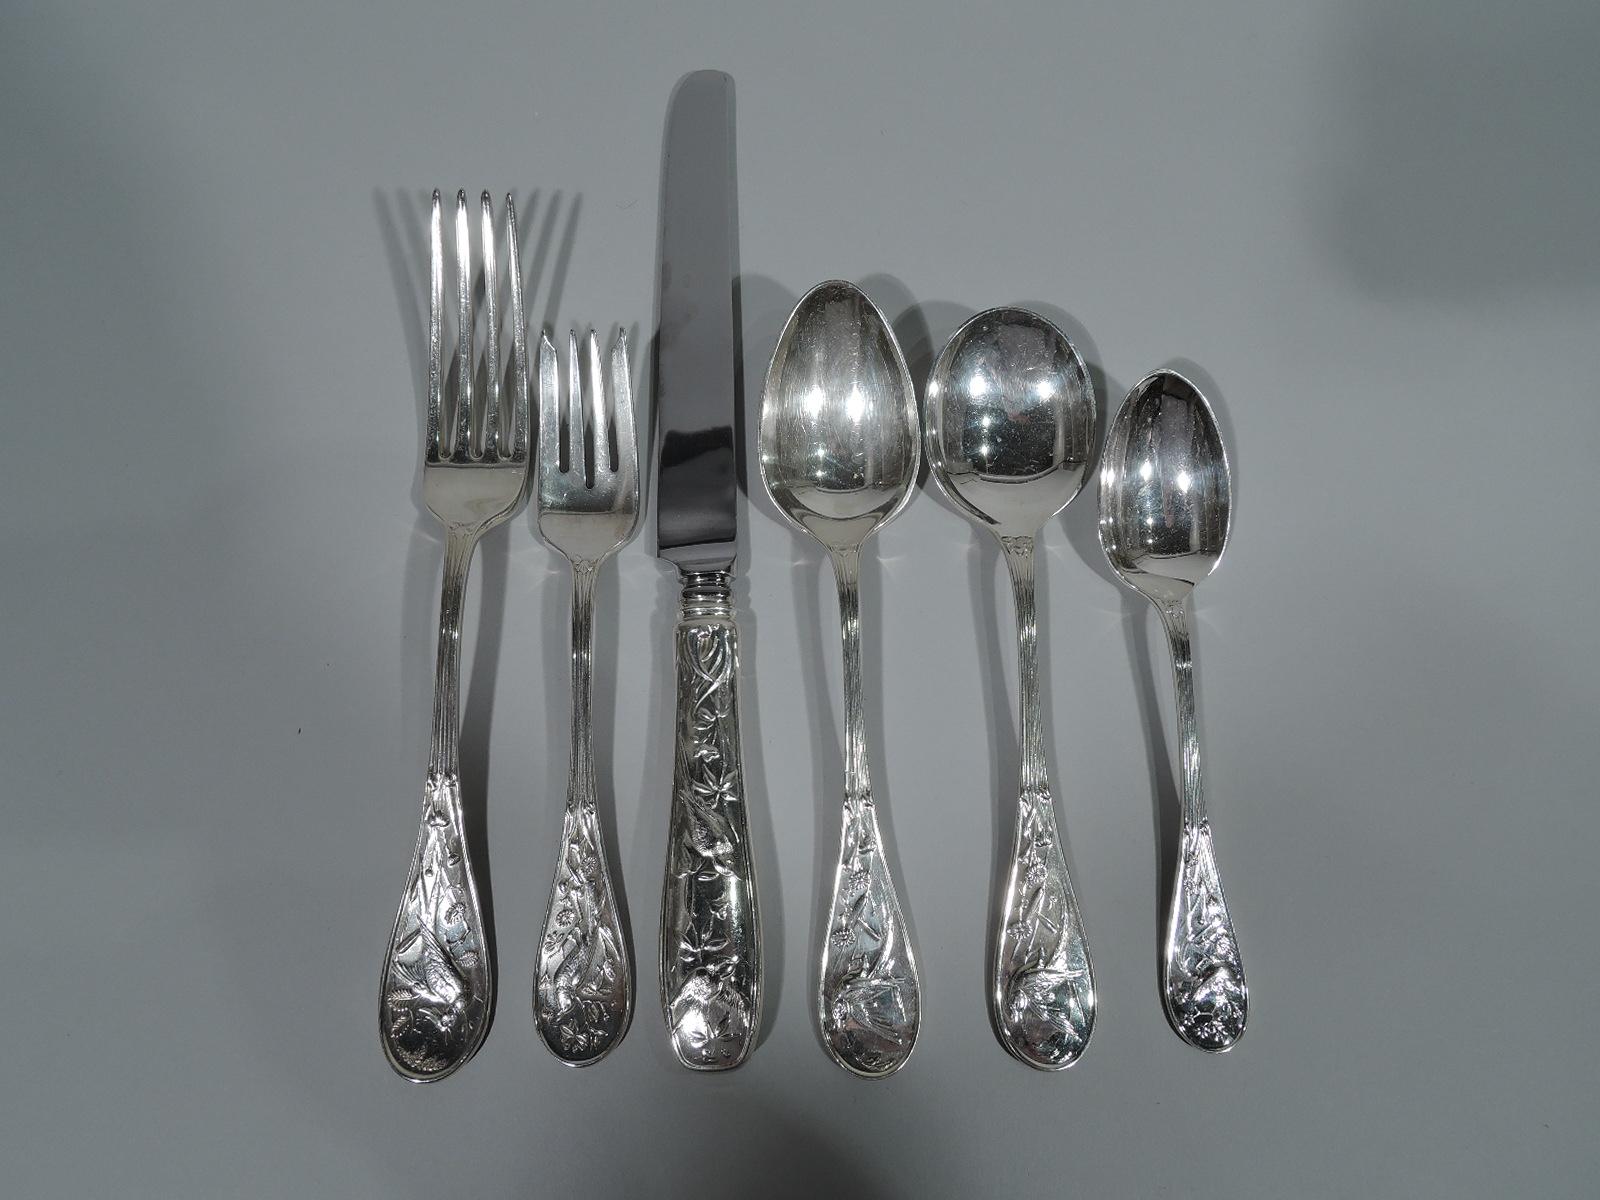 Wonderful sterling silver dinner service for 12 in Audubon pattern. Made by Tiffany & Co. in New York. This set comprises 83 pieces: Forks: 12 dinner forks (8 1/8) and 12 salad forks (6 3/4); Spoons: 11 soup spoons (7 1/4), 12 gumbo spoons (7), and